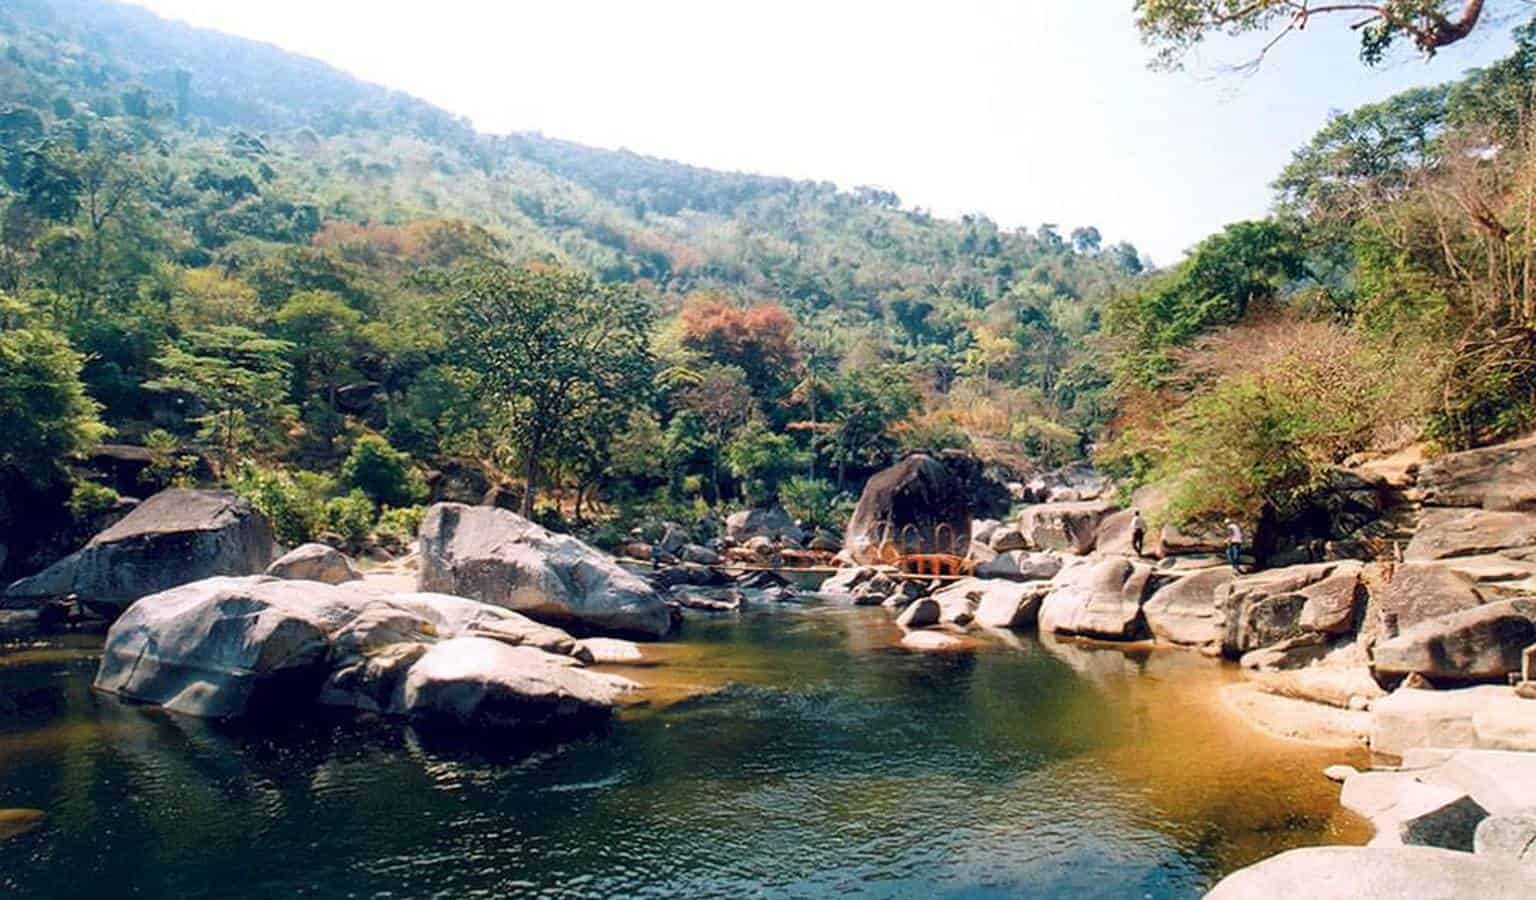 Discover the natural beauty and wildlife of Yok Don National Park, the largest nature reserve in Vietnam.